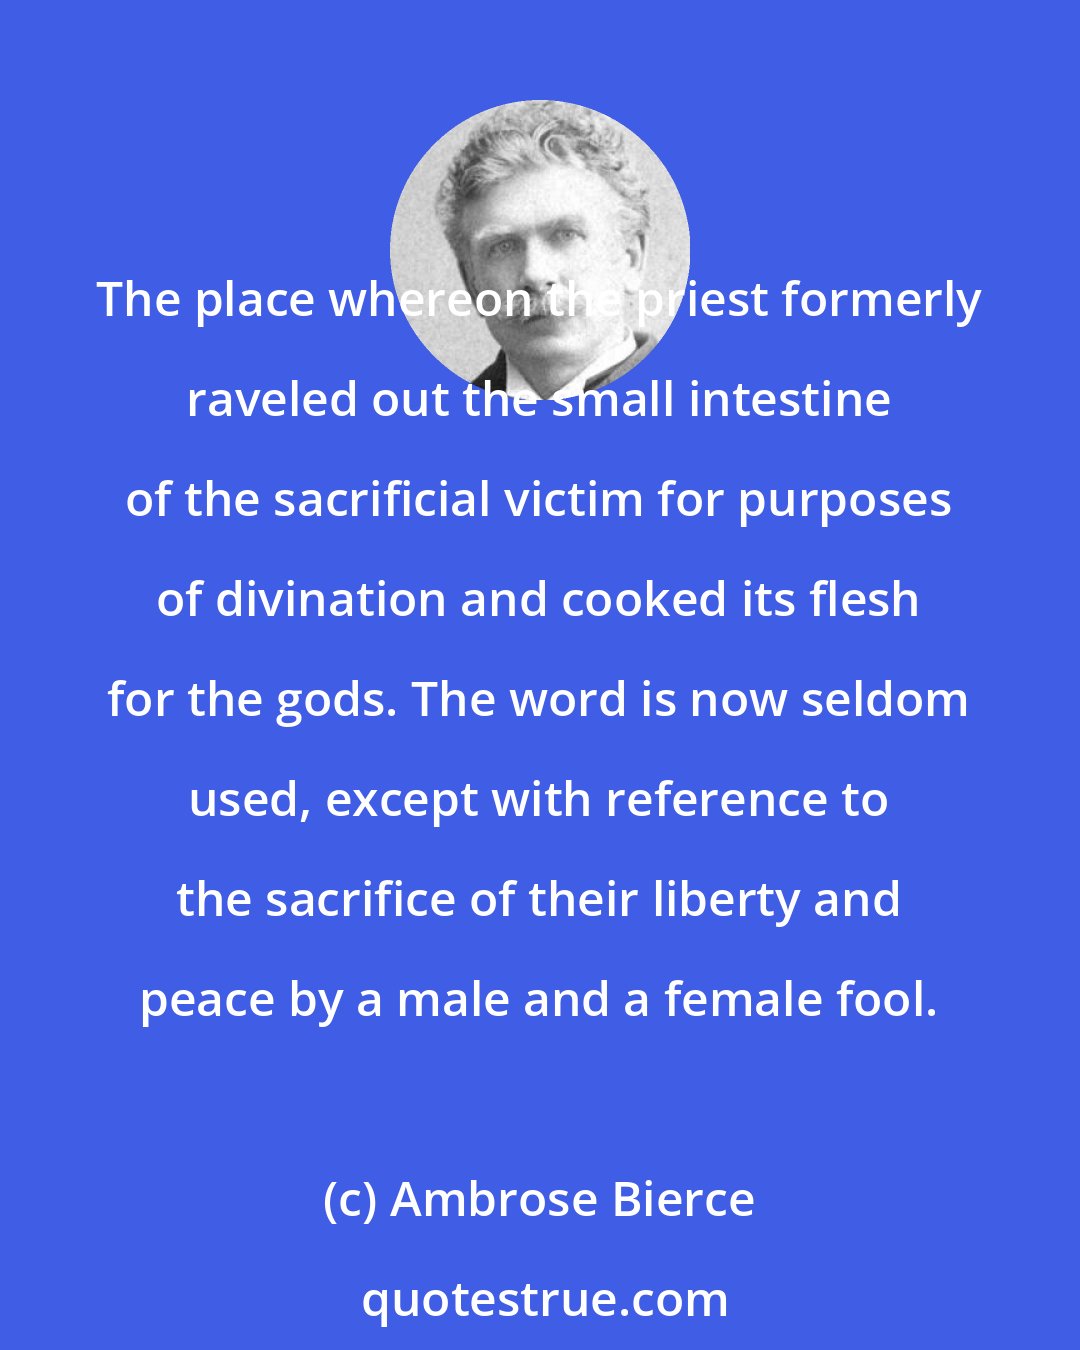 Ambrose Bierce: The place whereon the priest formerly raveled out the small intestine of the sacrificial victim for purposes of divination and cooked its flesh for the gods. The word is now seldom used, except with reference to the sacrifice of their liberty and peace by a male and a female fool.